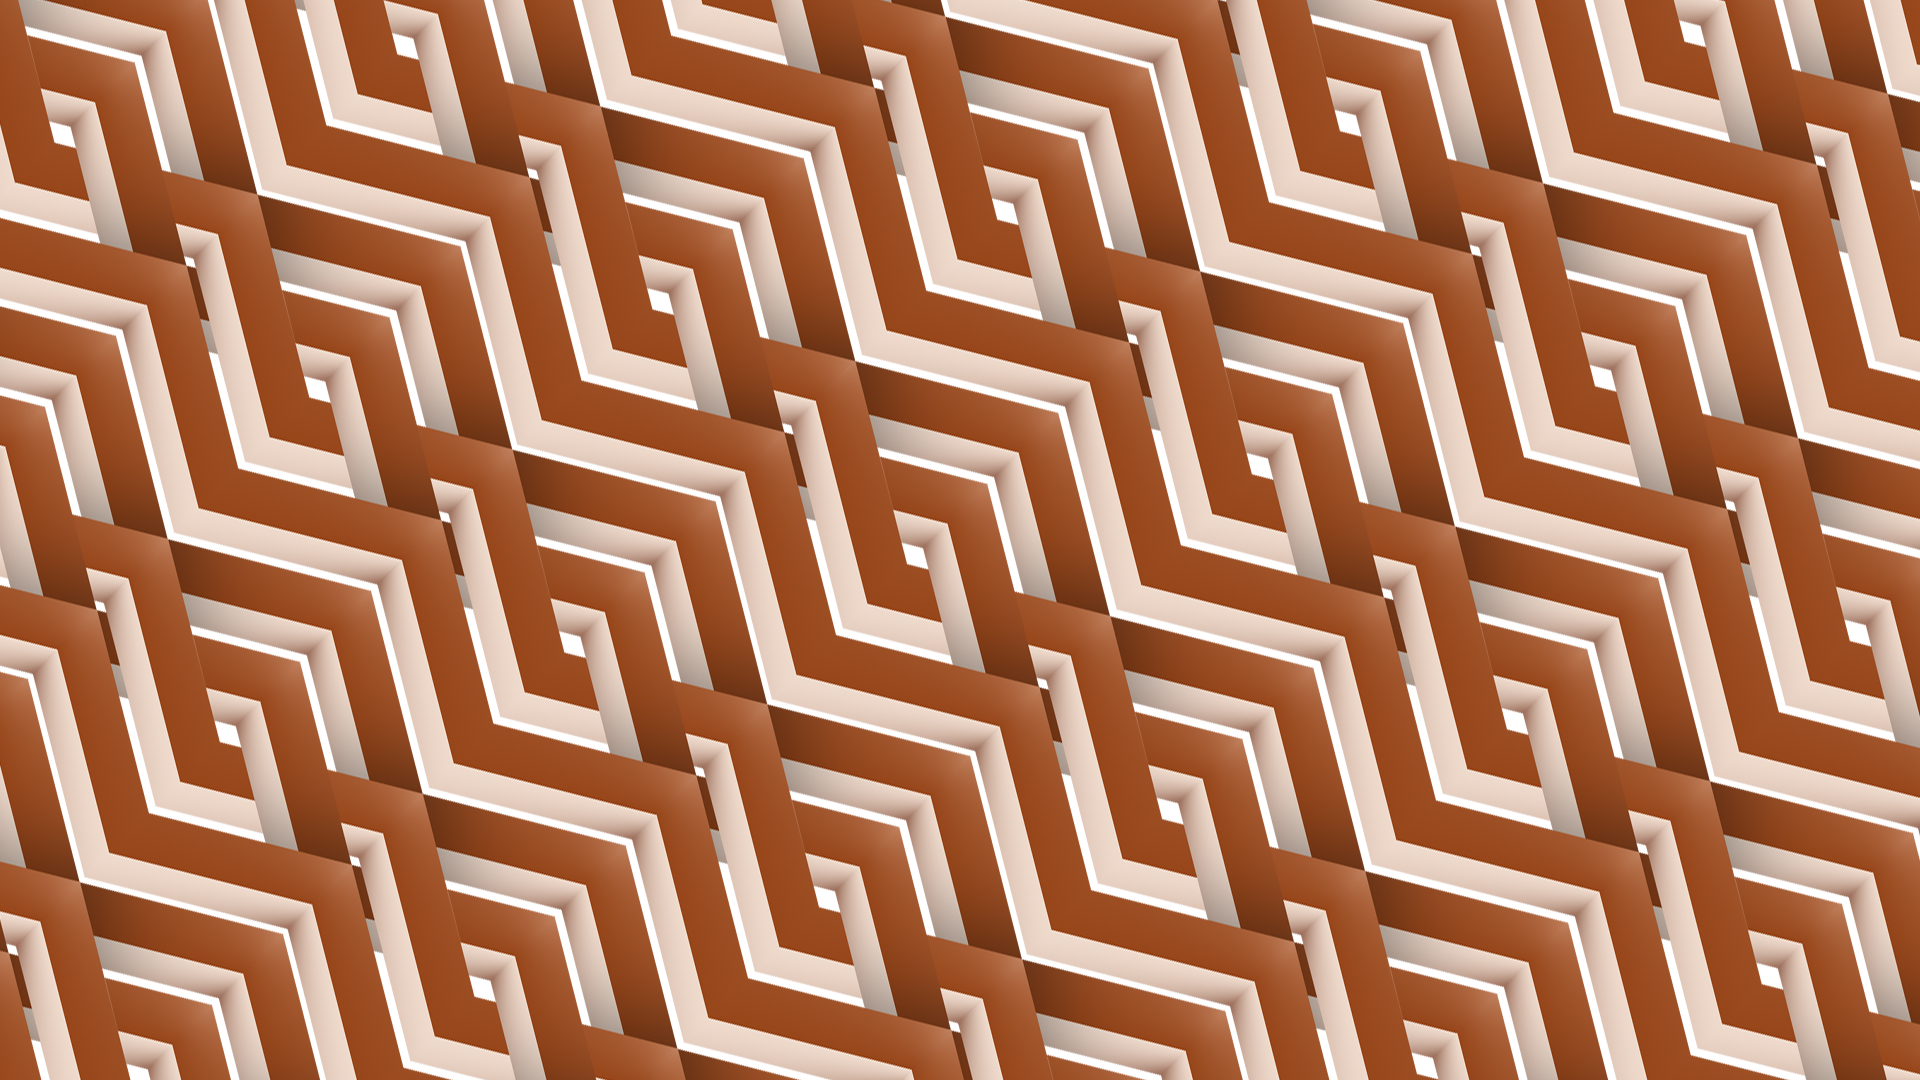 Lines Tile Abstract Shapes 1920x1080